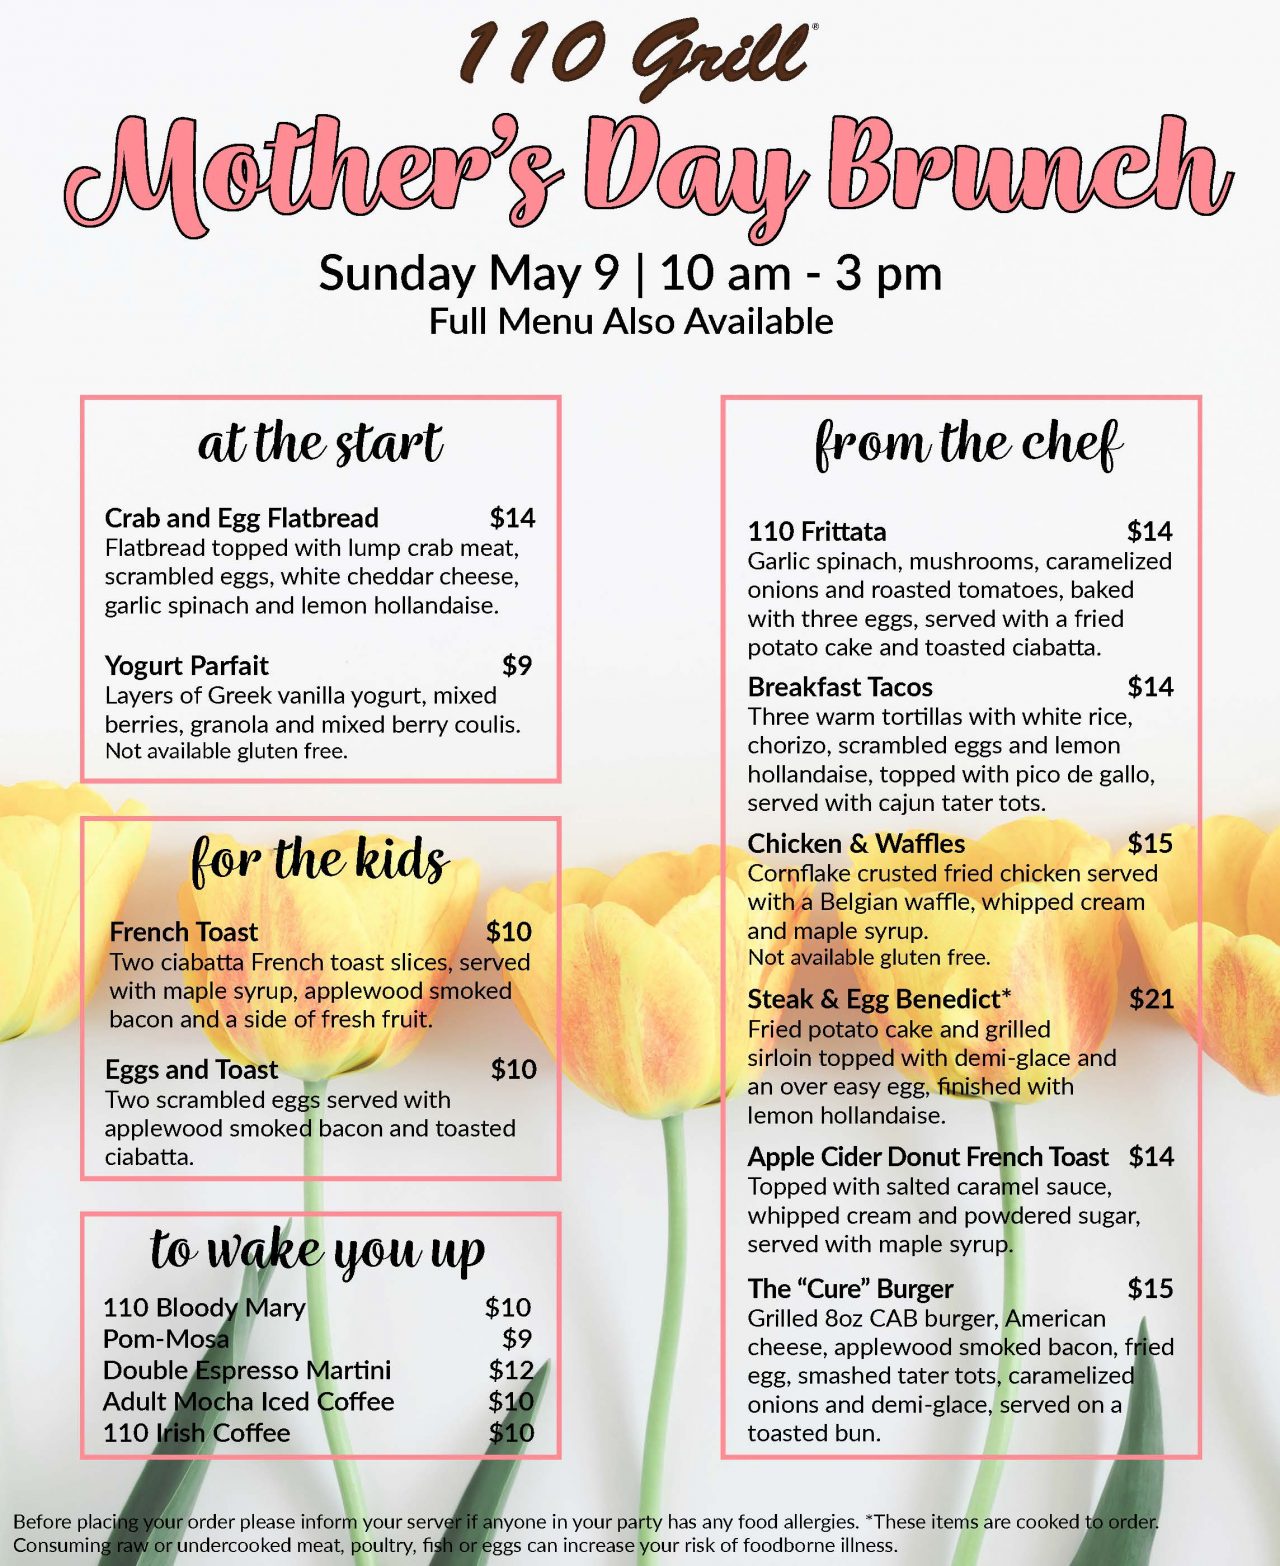 Celebrate Mother's Day with Brunch at 110 Grill! - Poughkeepsie Galleria